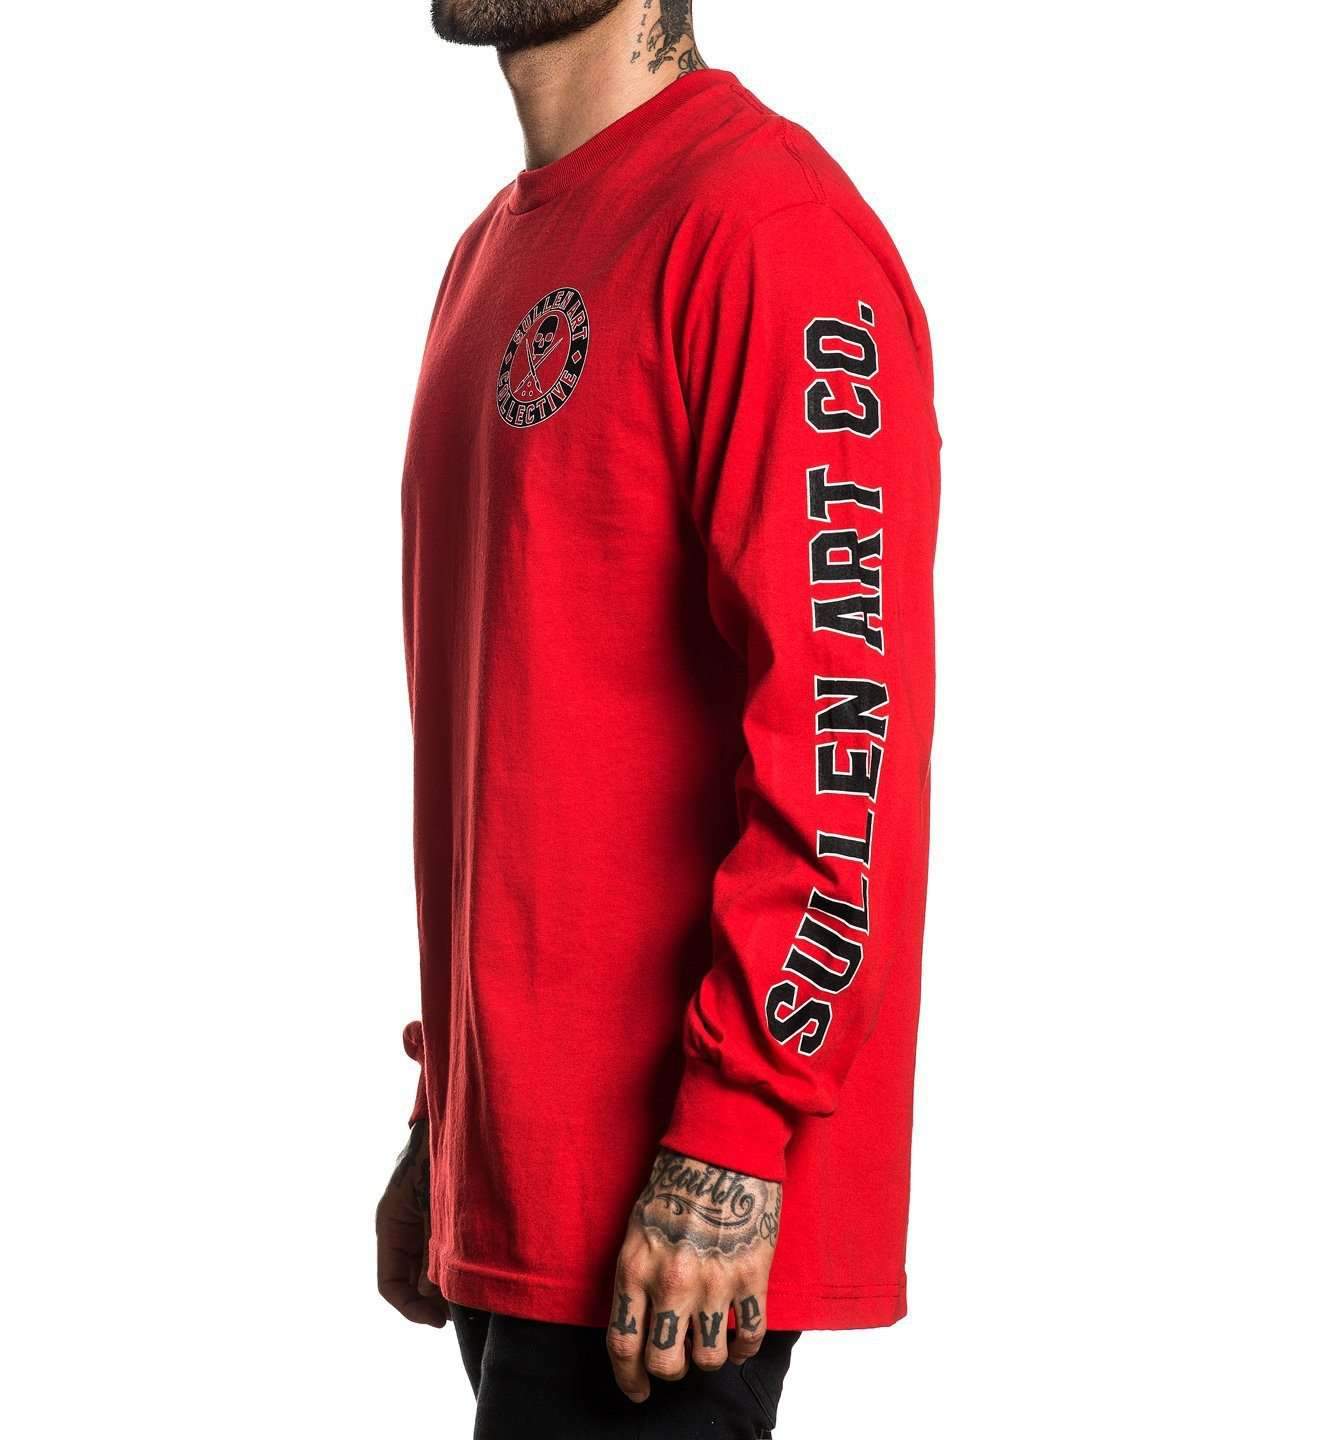 BADGE OF HONOR RED LONG SLEEVE